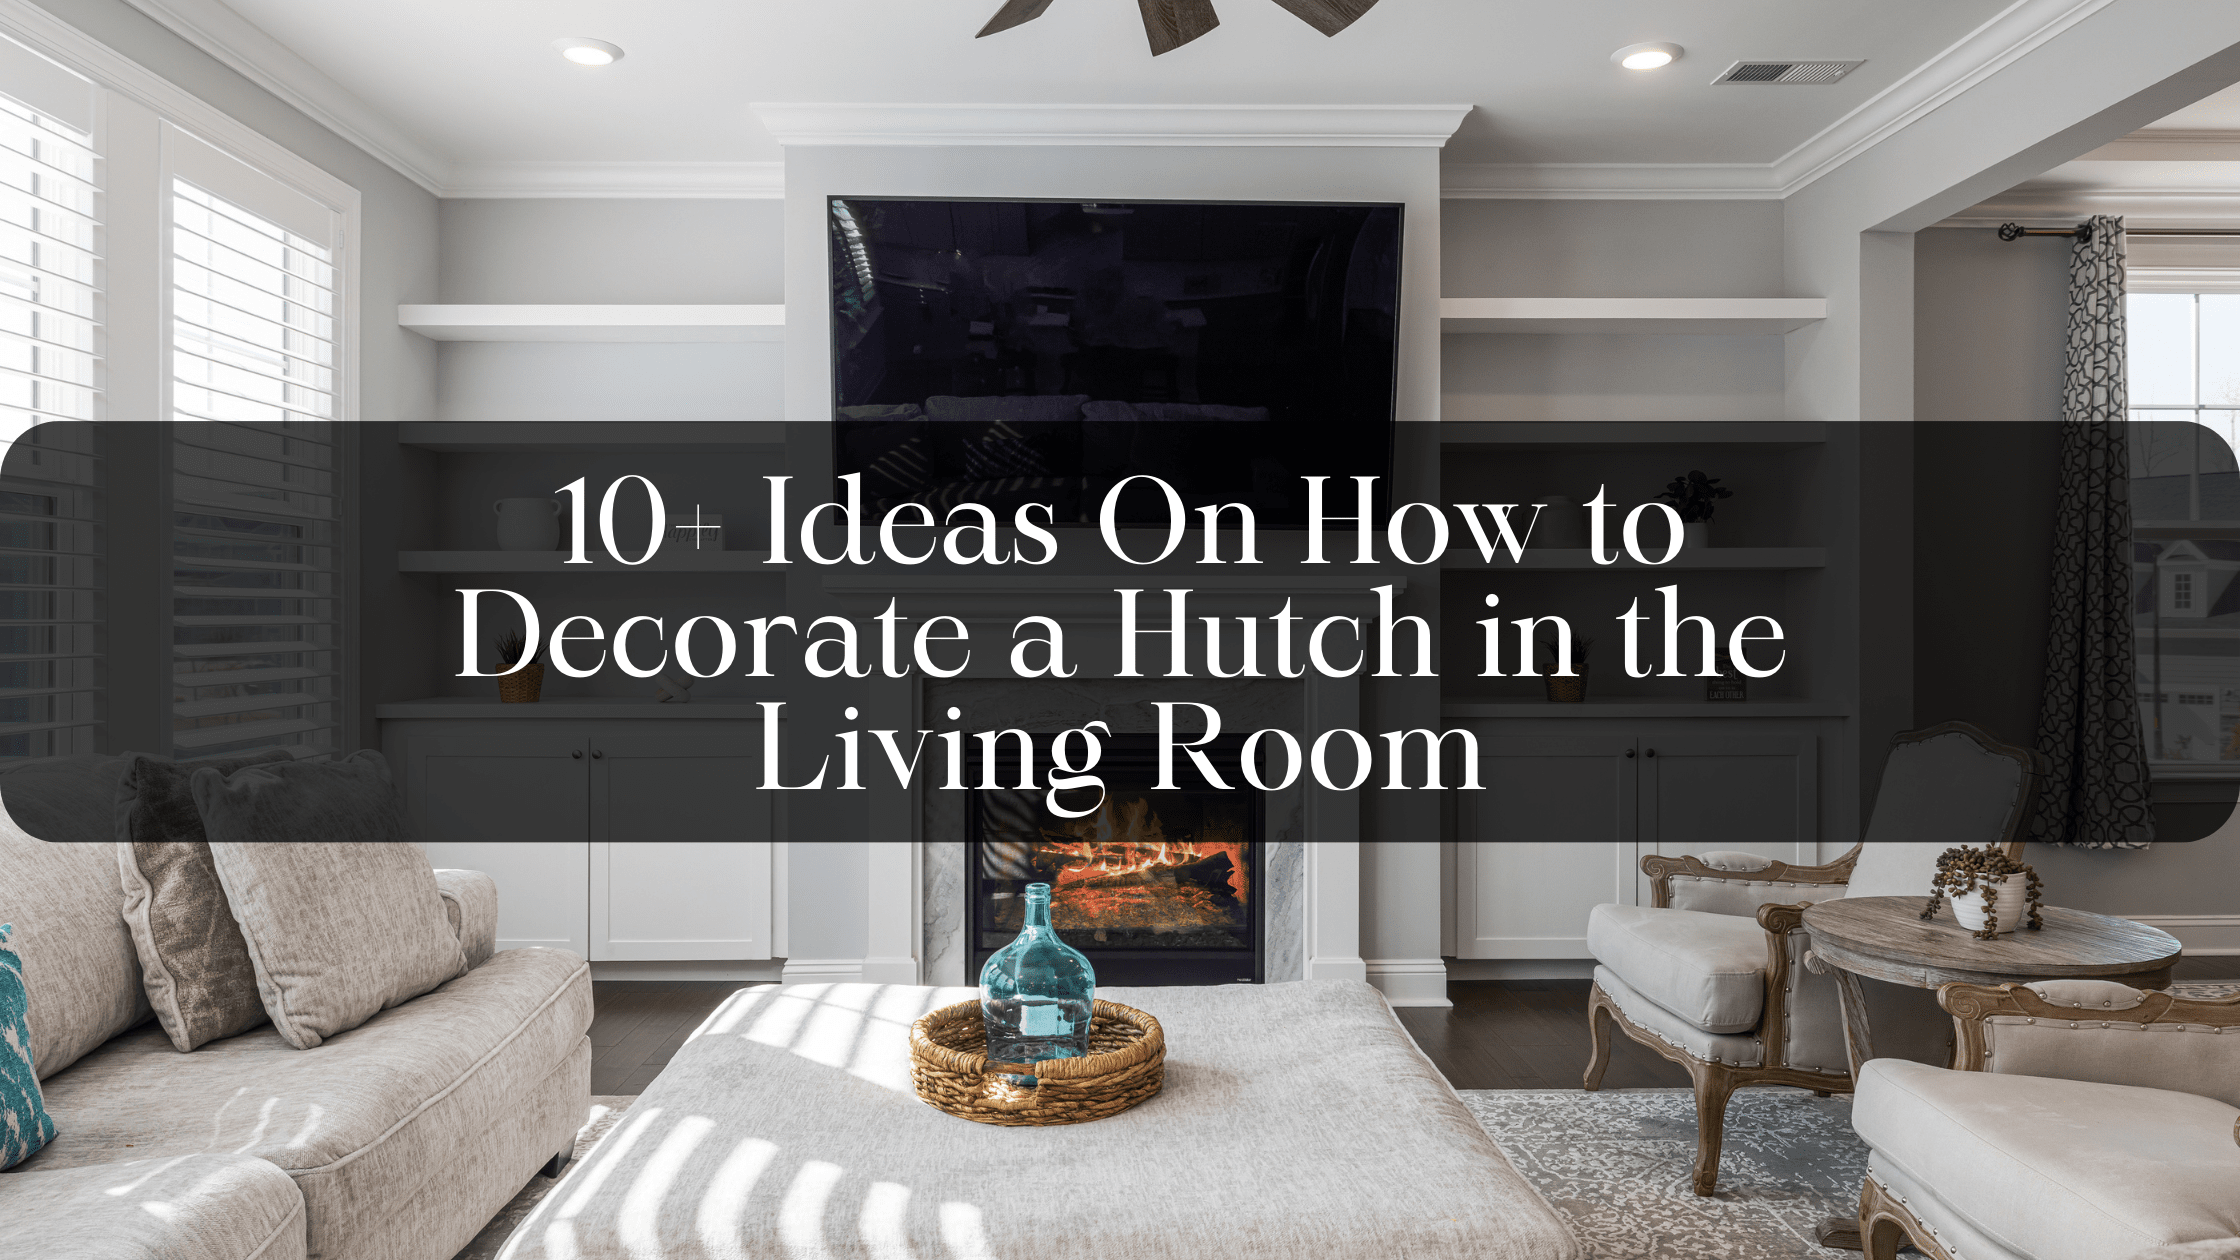 10+ Ideas On How to Decorate a Hutch in the Living Room